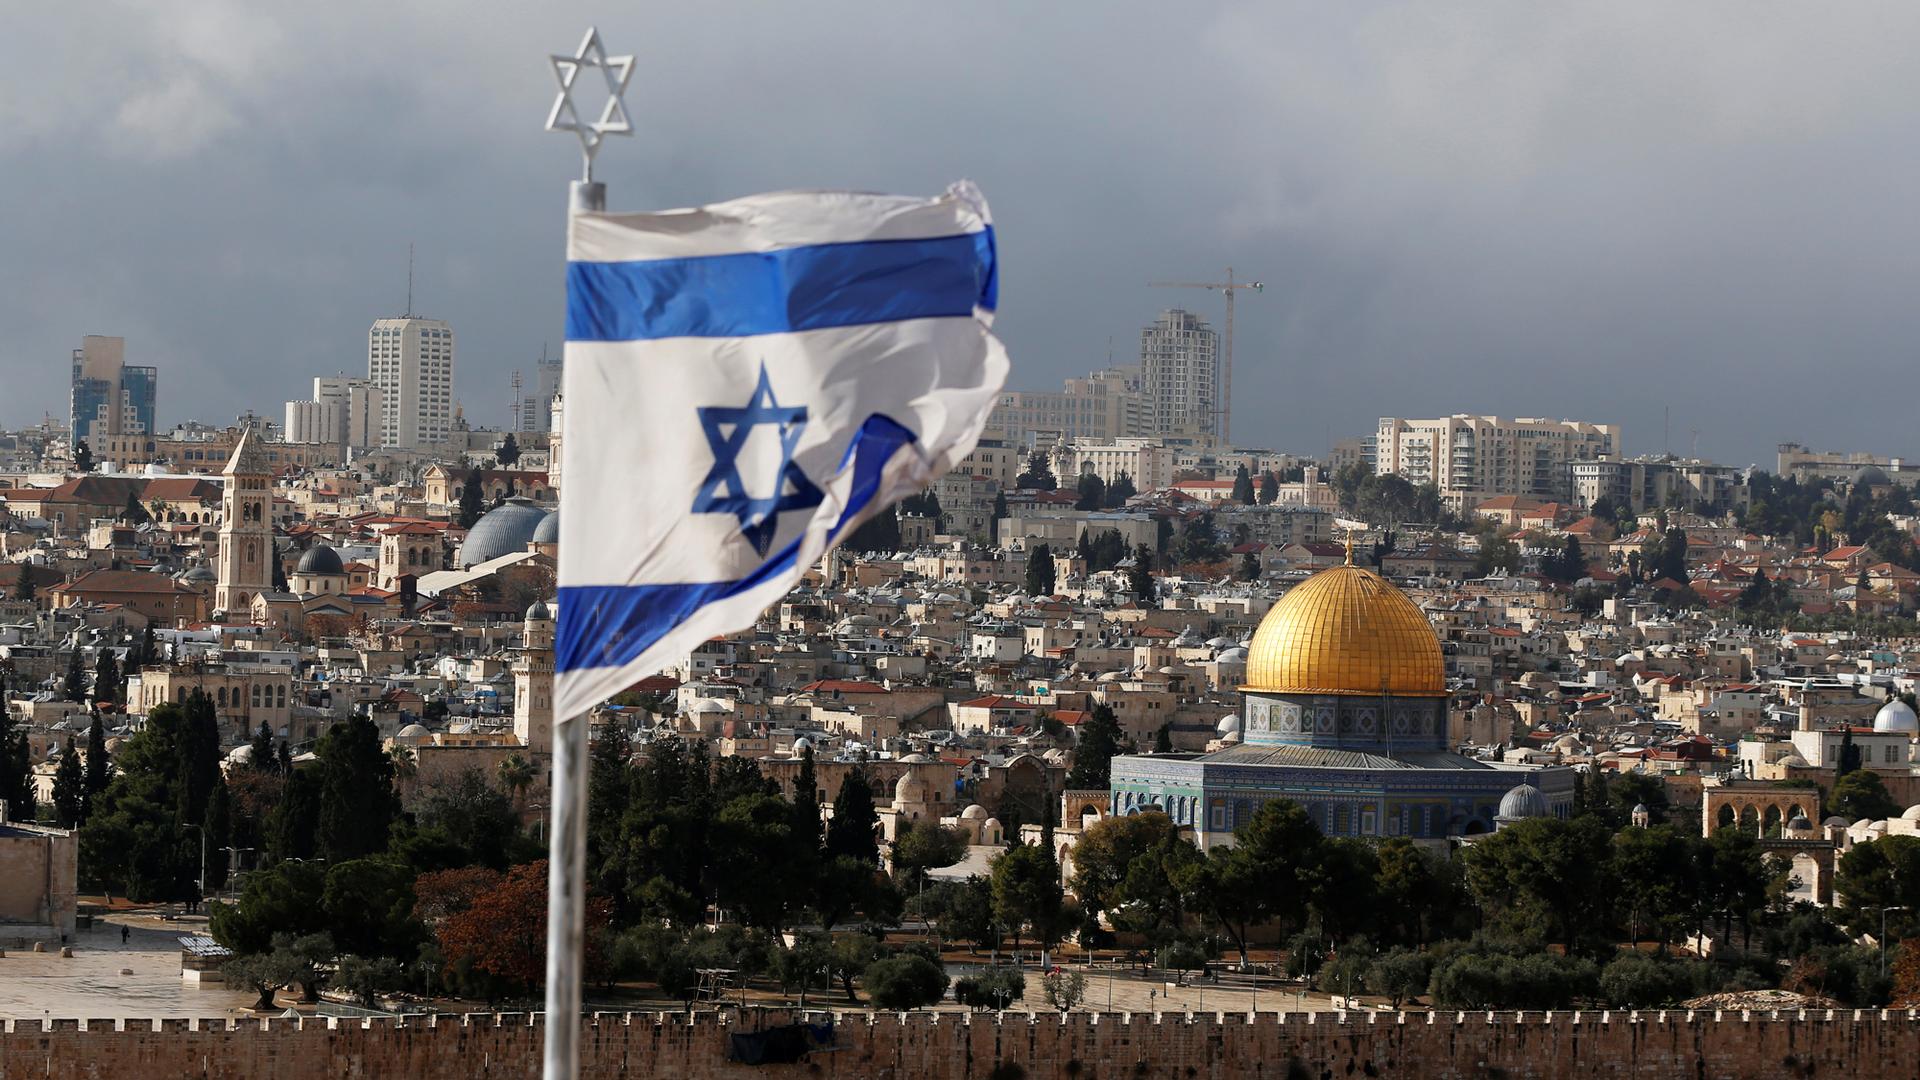 An Israeli flag is seen in the forground with the golden Dome of the Rock seen in the background.